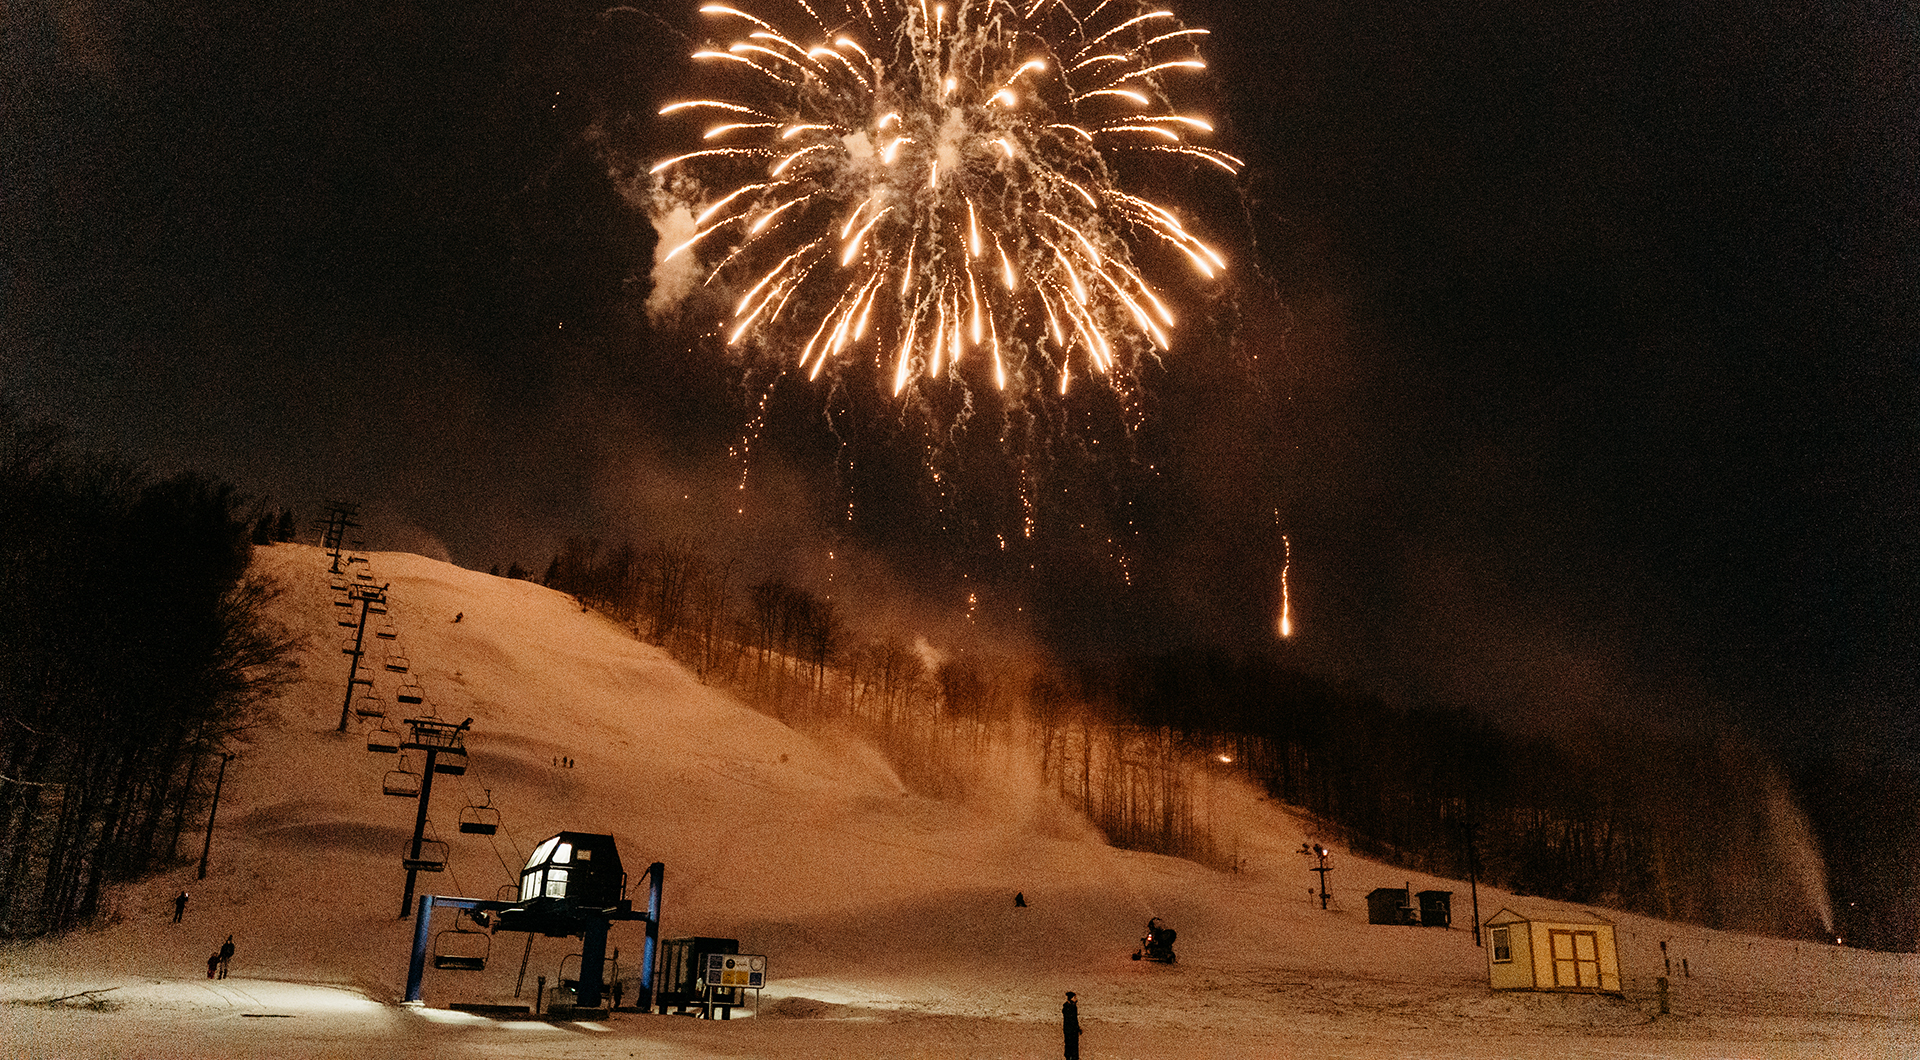 White Fireworks over Schuss Mountain at night.